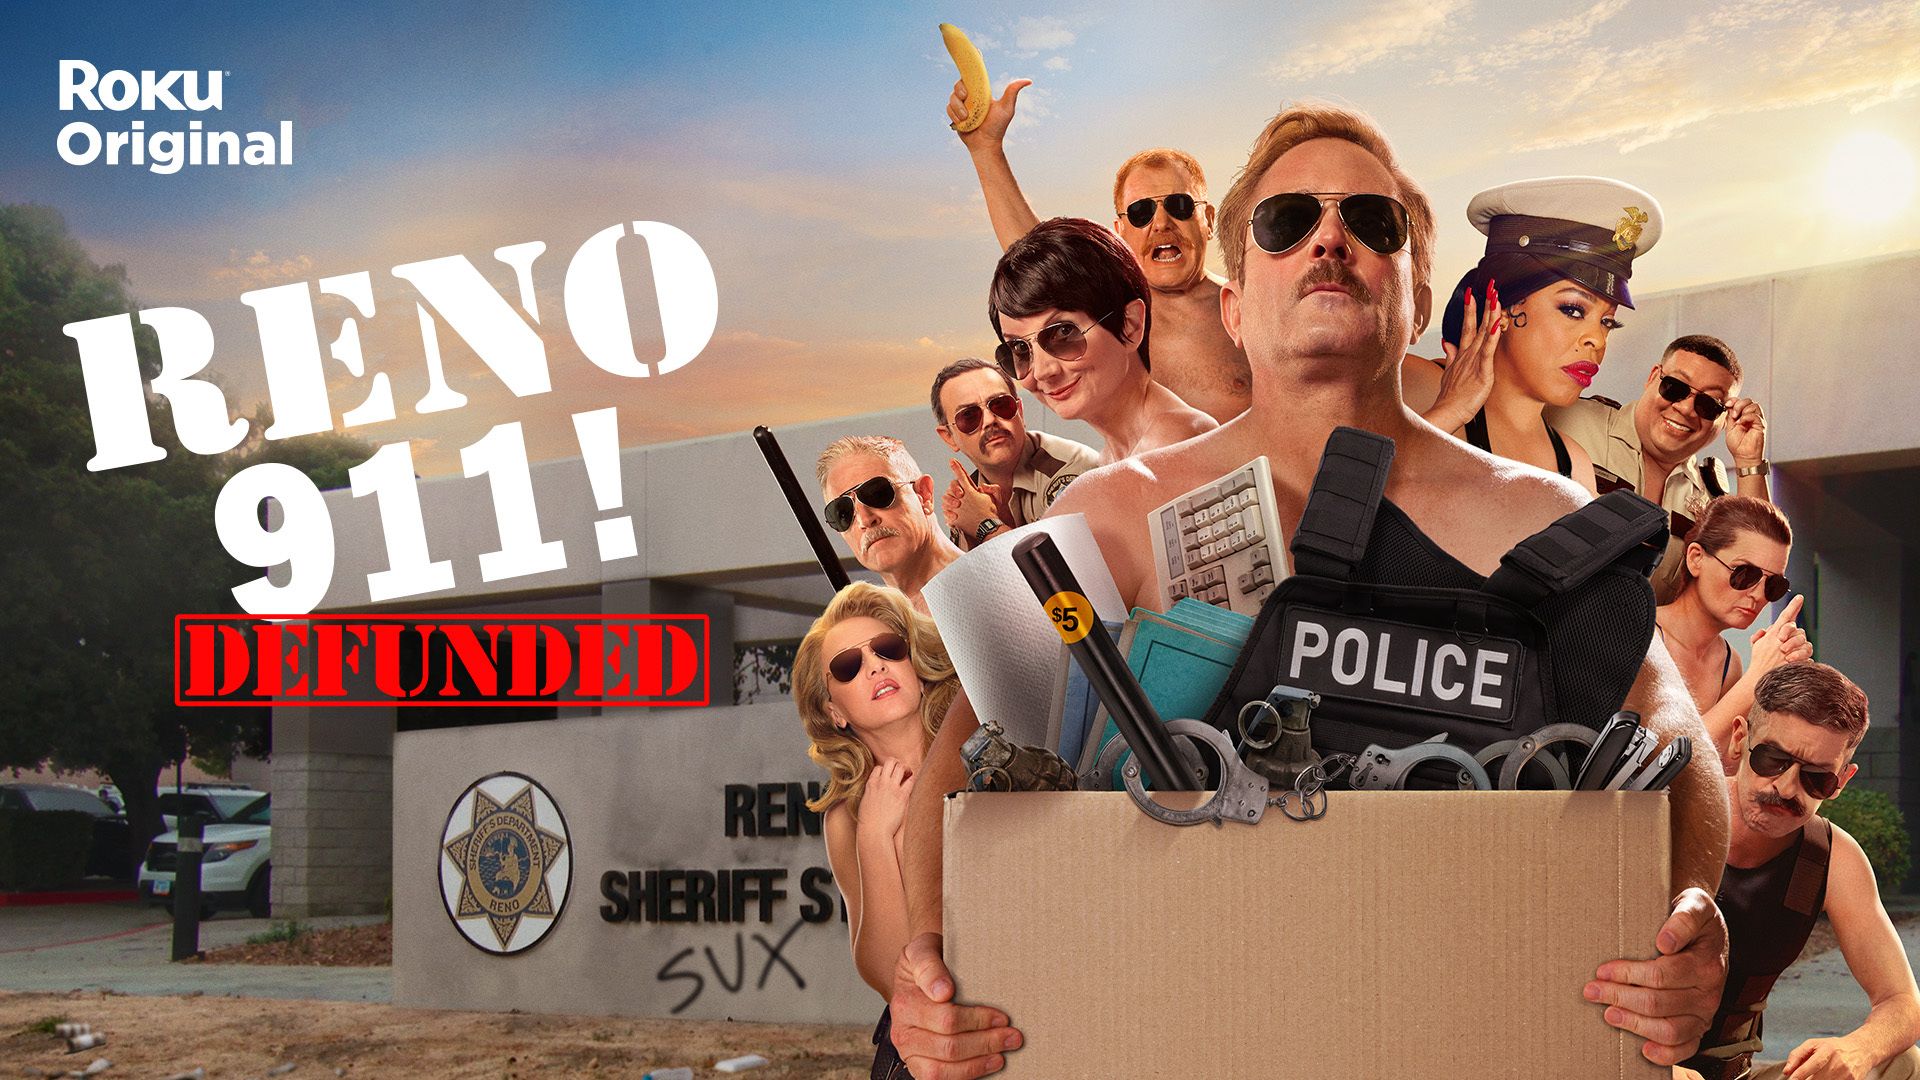 'Reno 911! Defunded' Poster